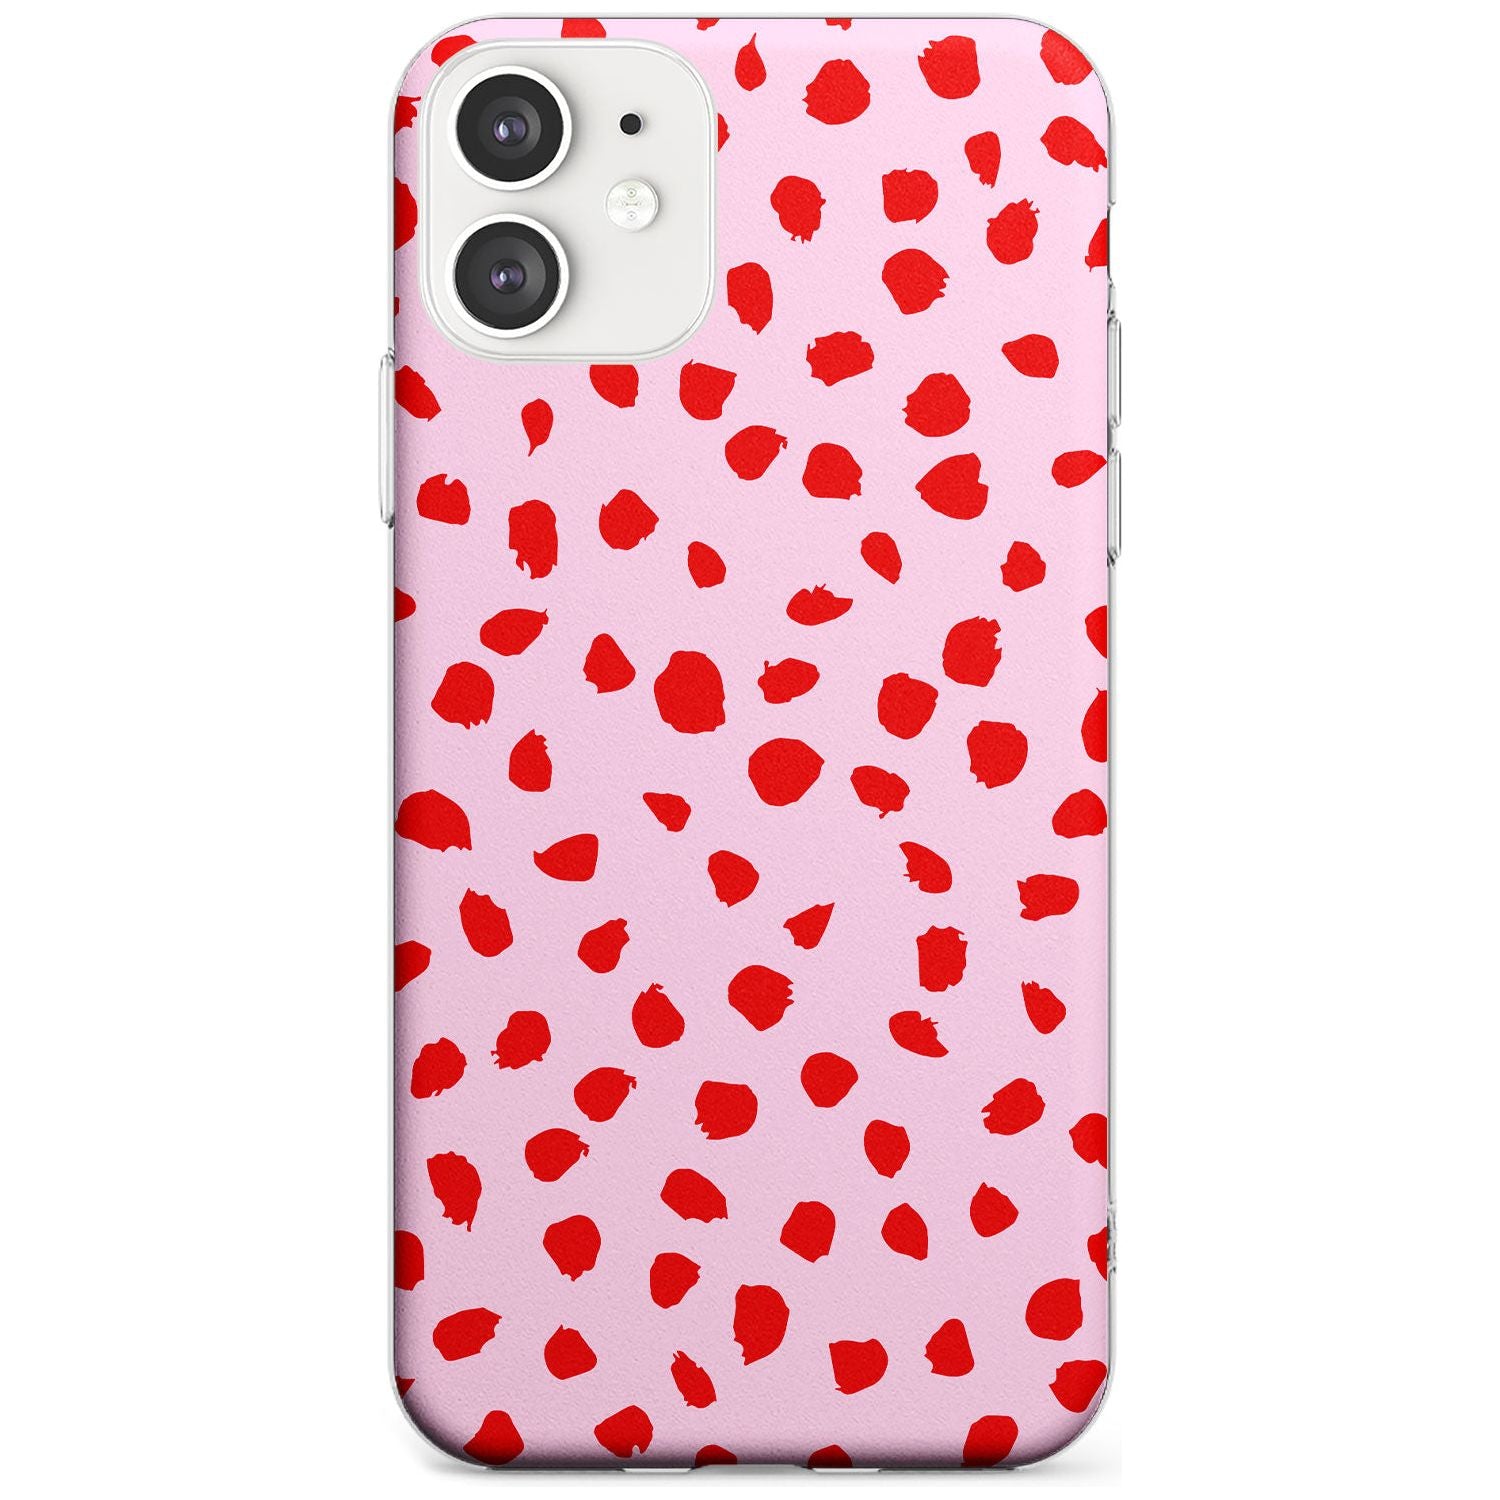 Red on Pink Dalmatian Polka Dot Spots Slim TPU Phone Case for iPhone 11